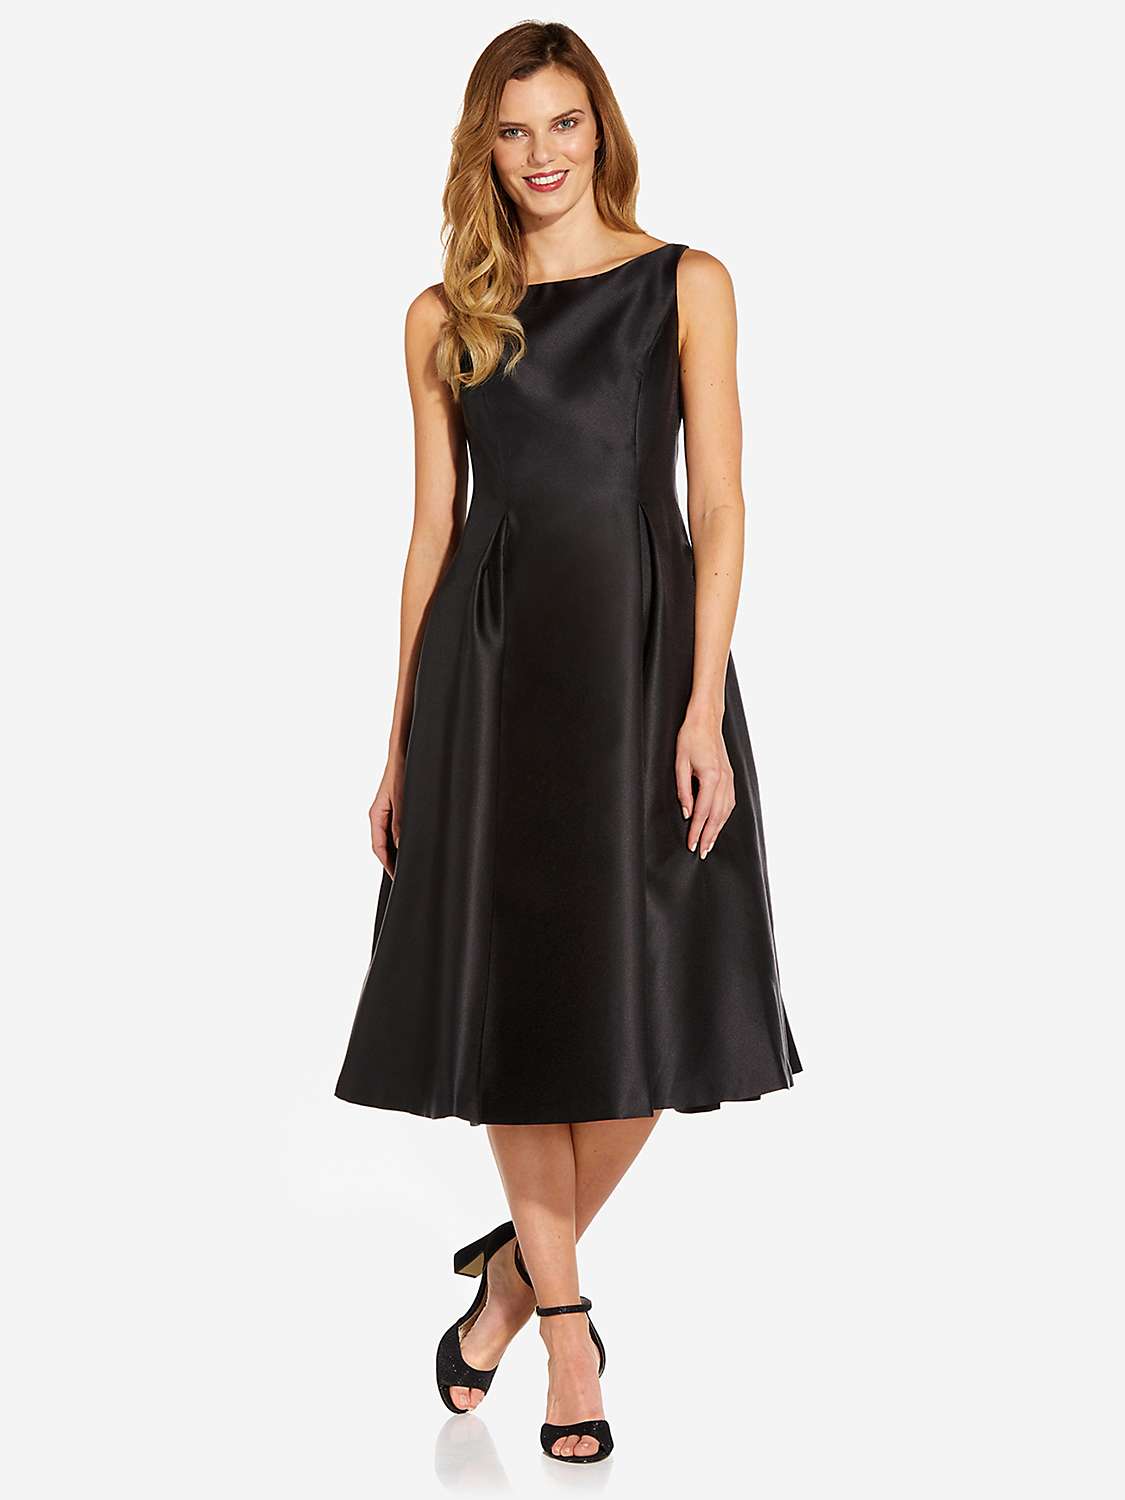 Buy Adrianna Papell Sleeveless Cocktail Dress, Black Online at johnlewis.com